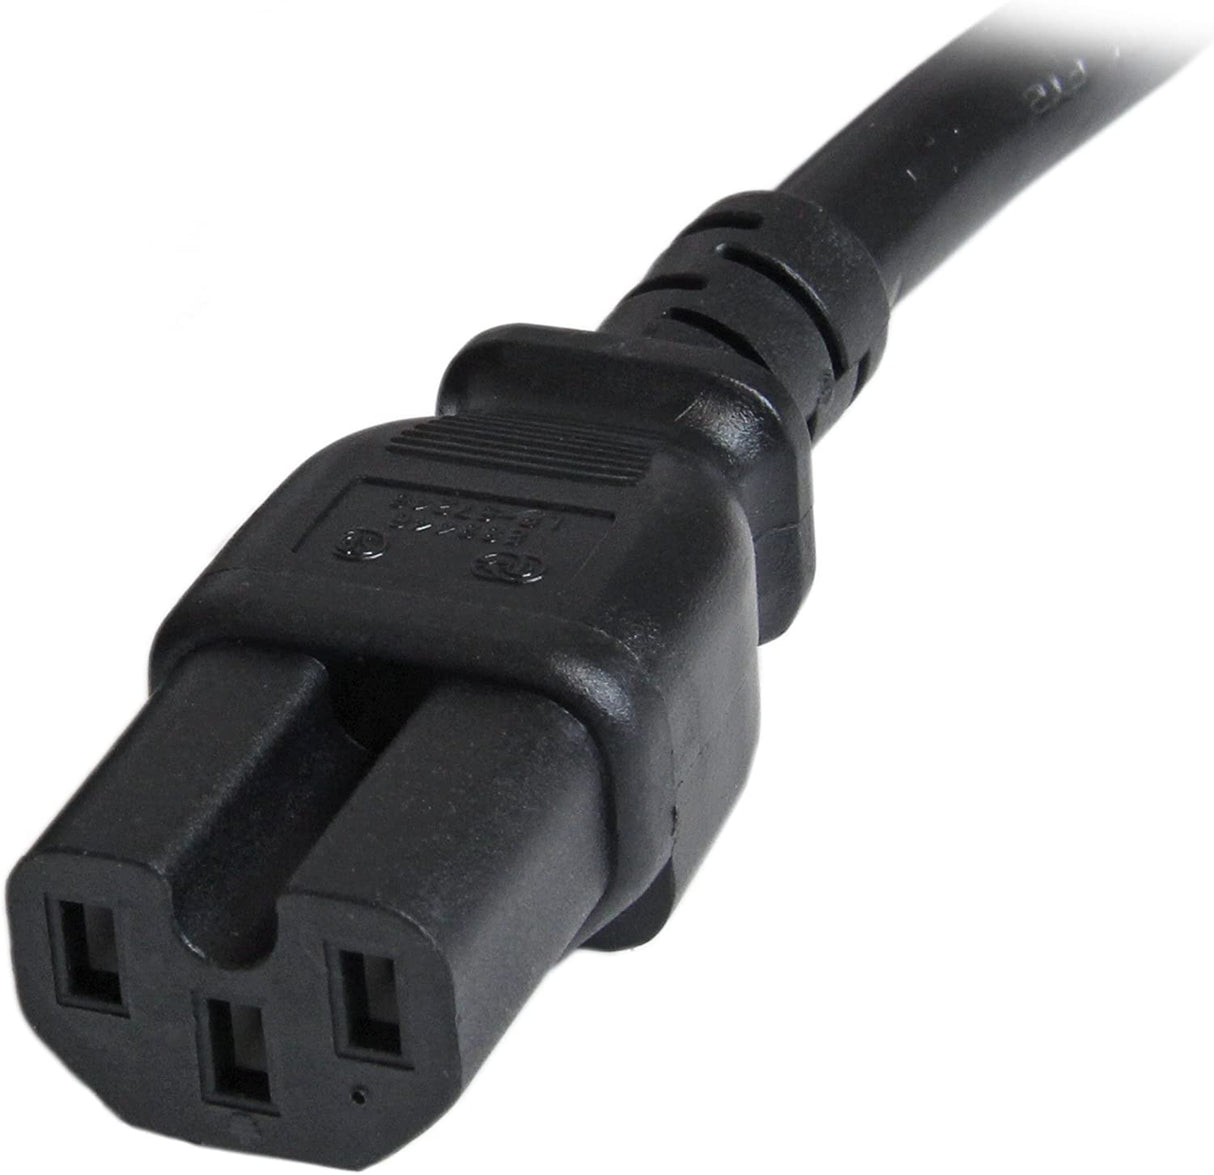 StarTech.com 3ft (1m) Heavy Duty Extension Cord, IEC 320 C14 to IEC 320 C15 Black Extension Cord, 15A 125V, 14AWG, Heavy Gauge Power Extension Cable, Heavy Duty AC Power Cord, UL Listed (PXTC14C153) 3 ft / 1m 14 AWG